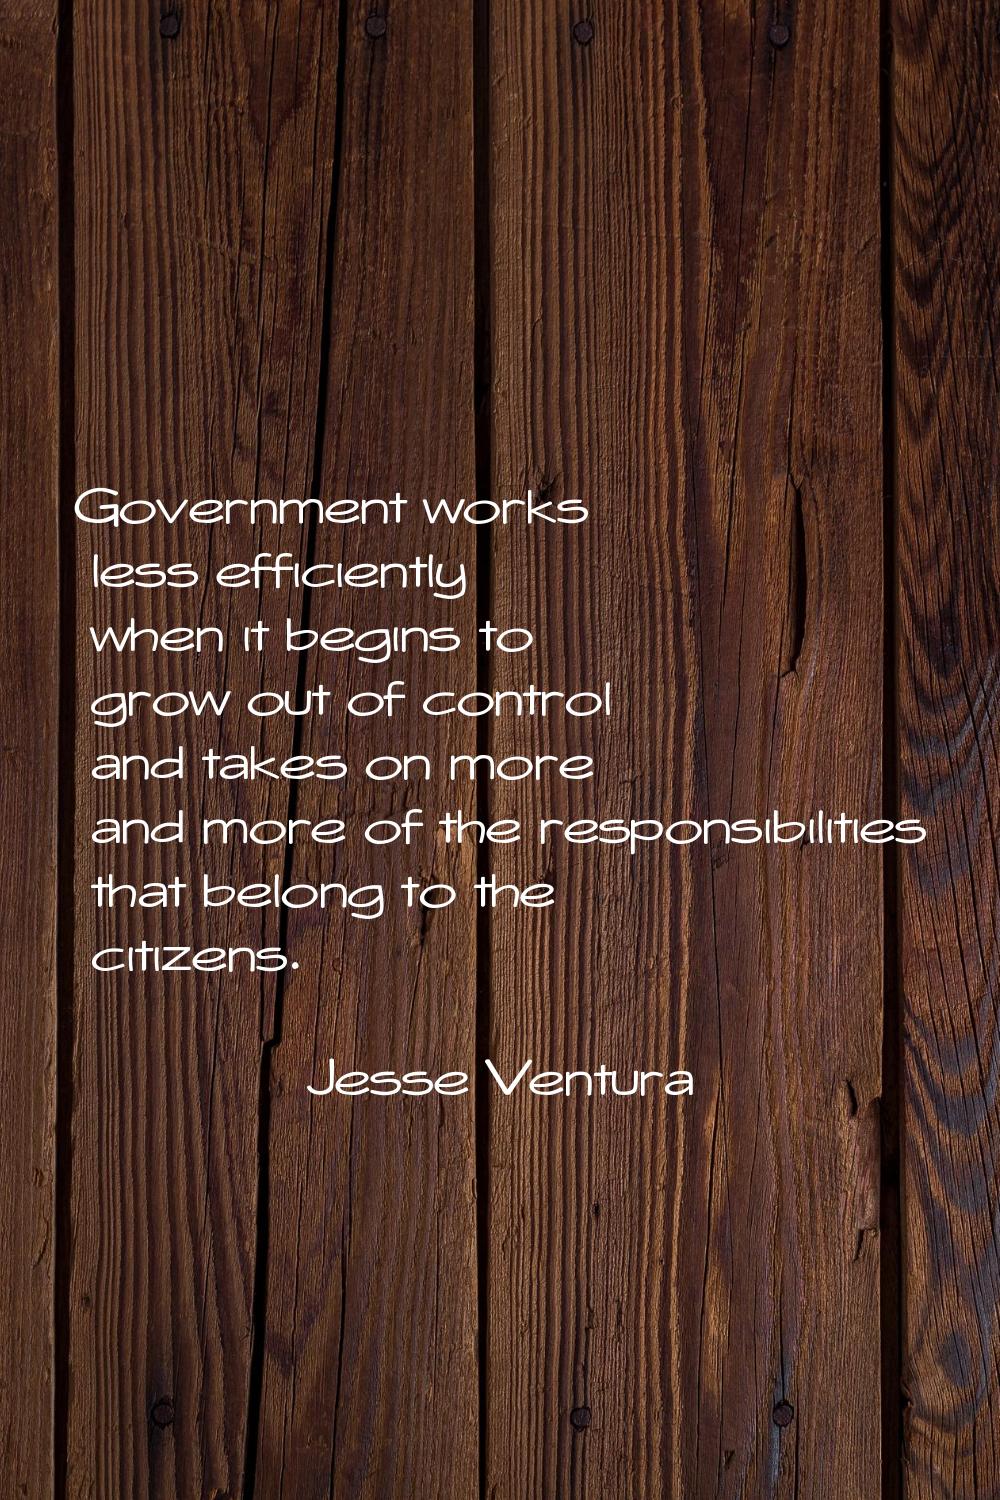 Government works less efficiently when it begins to grow out of control and takes on more and more 